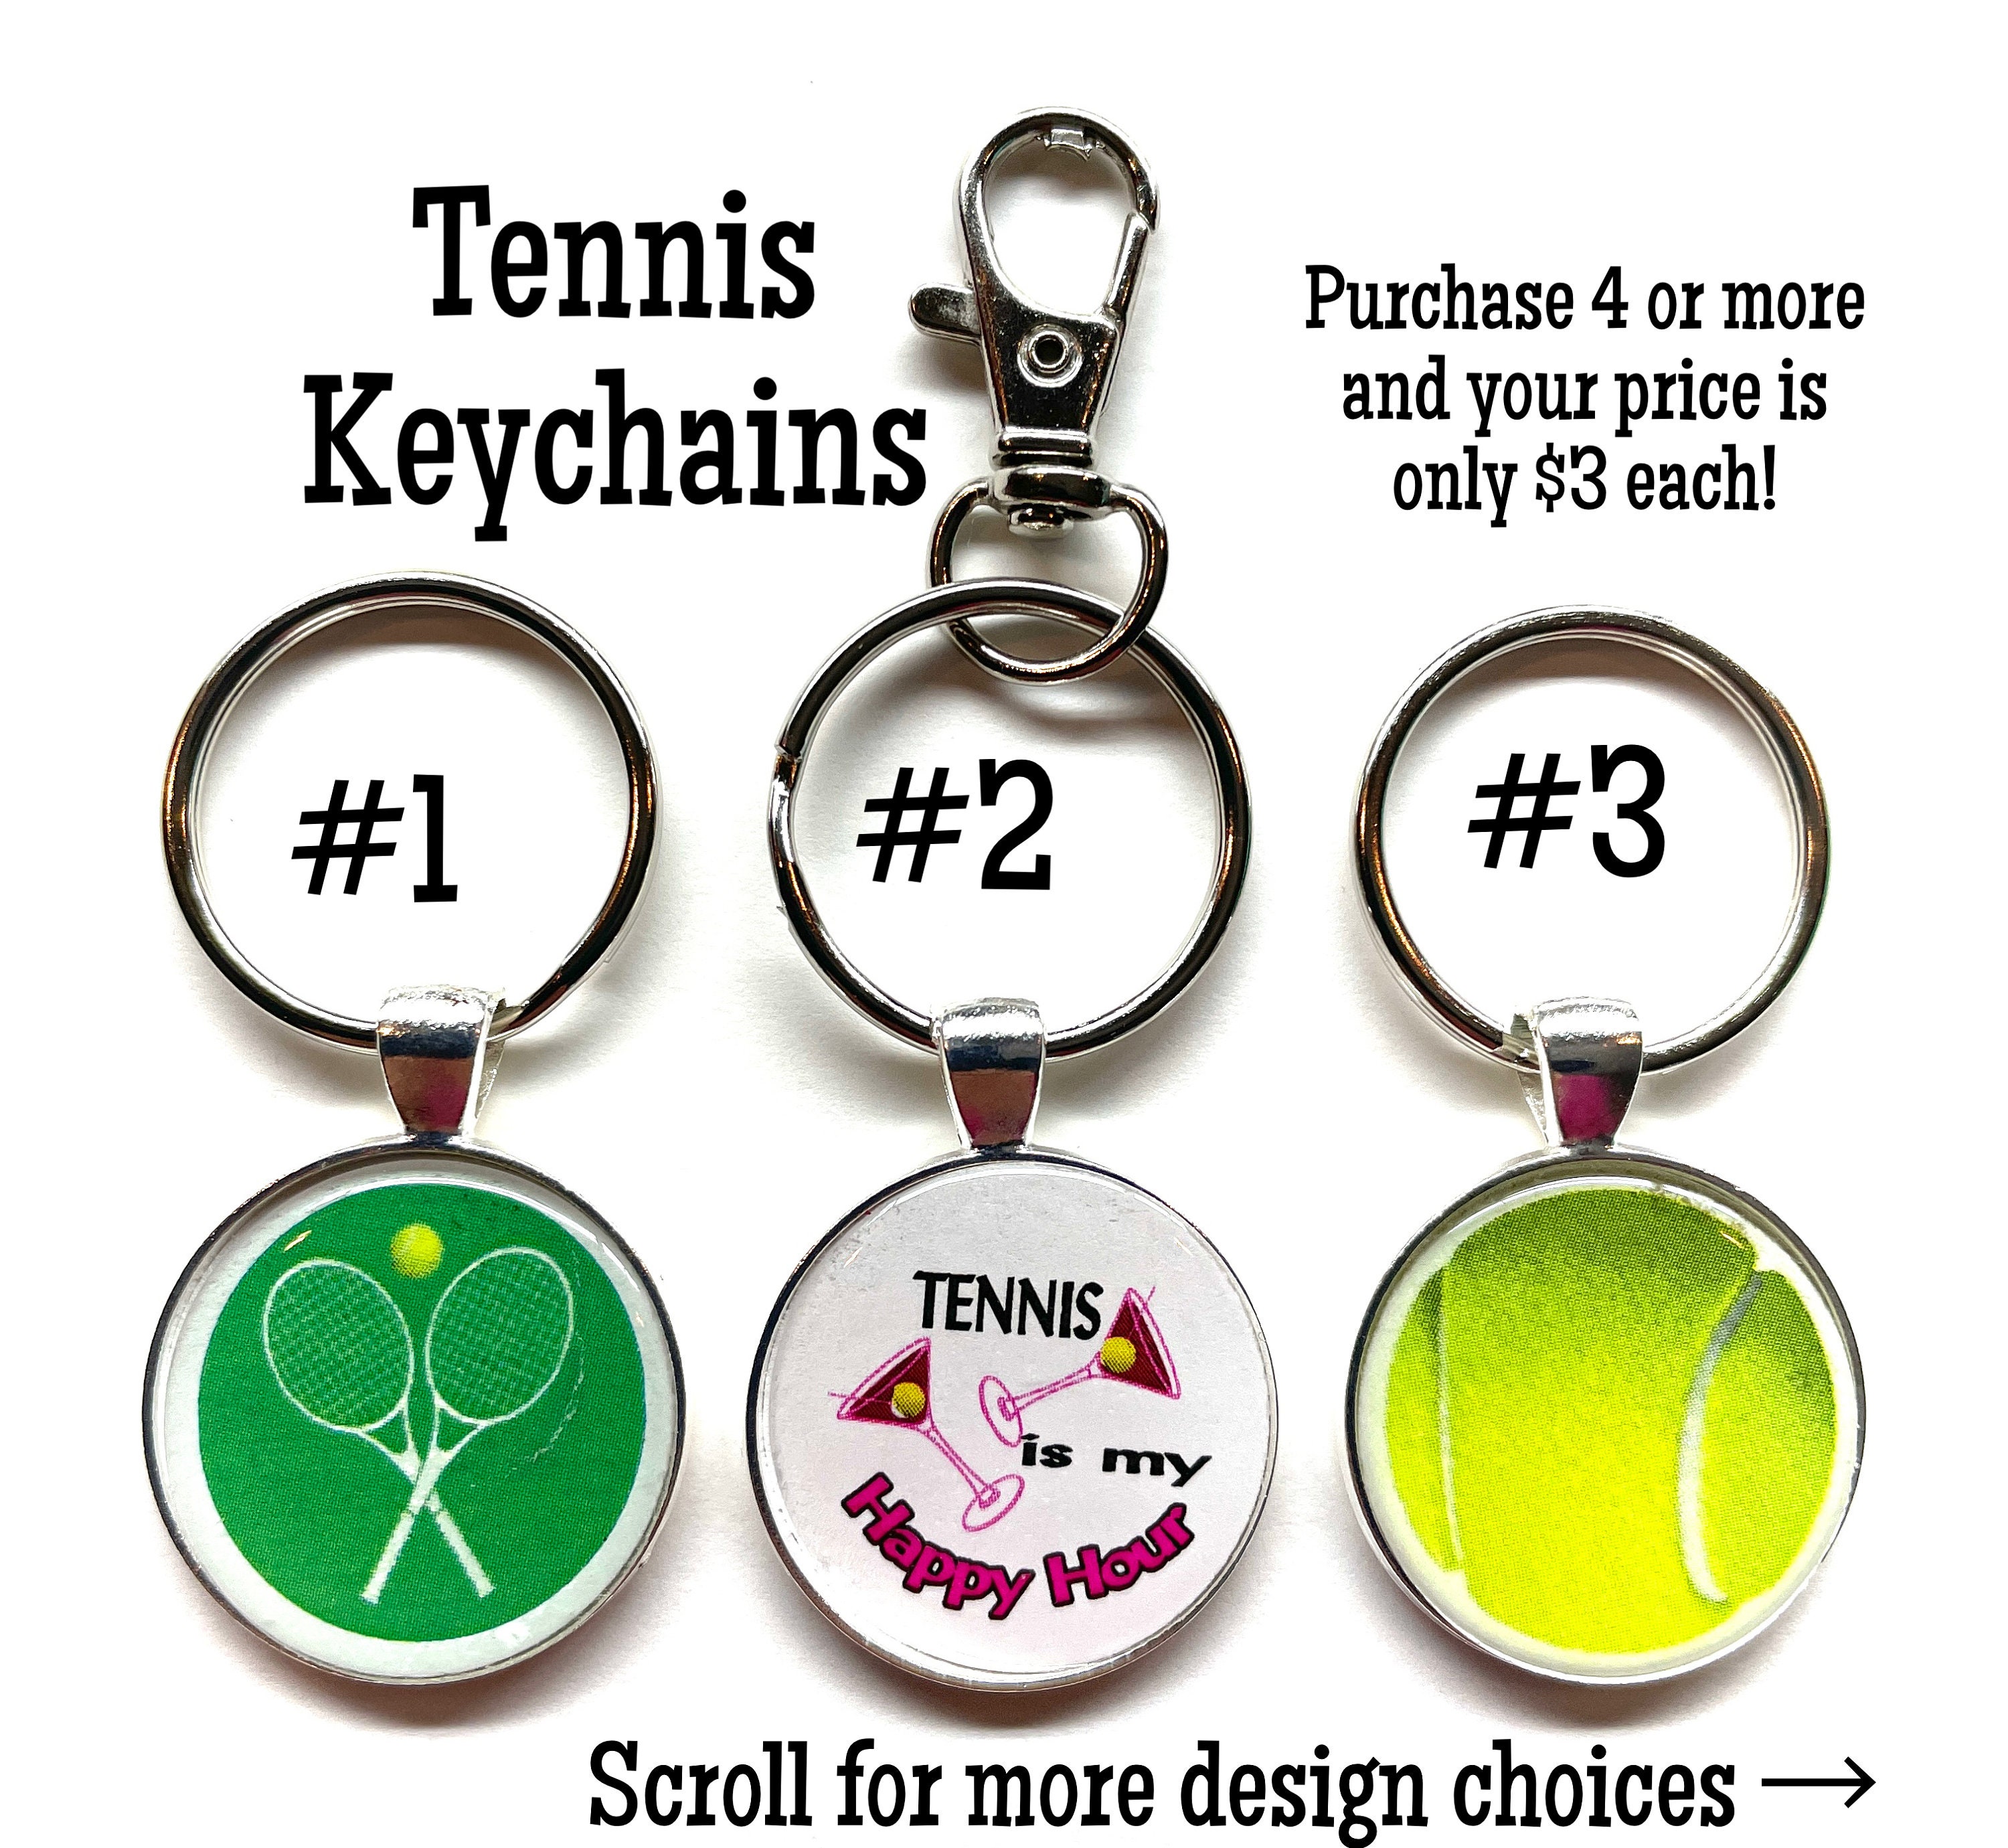 Fun Express - Metal Sport Ball Key Chain Assortment - Apparel Accessories -  Key Chains - Novelty Key Chains - 144 Pieces